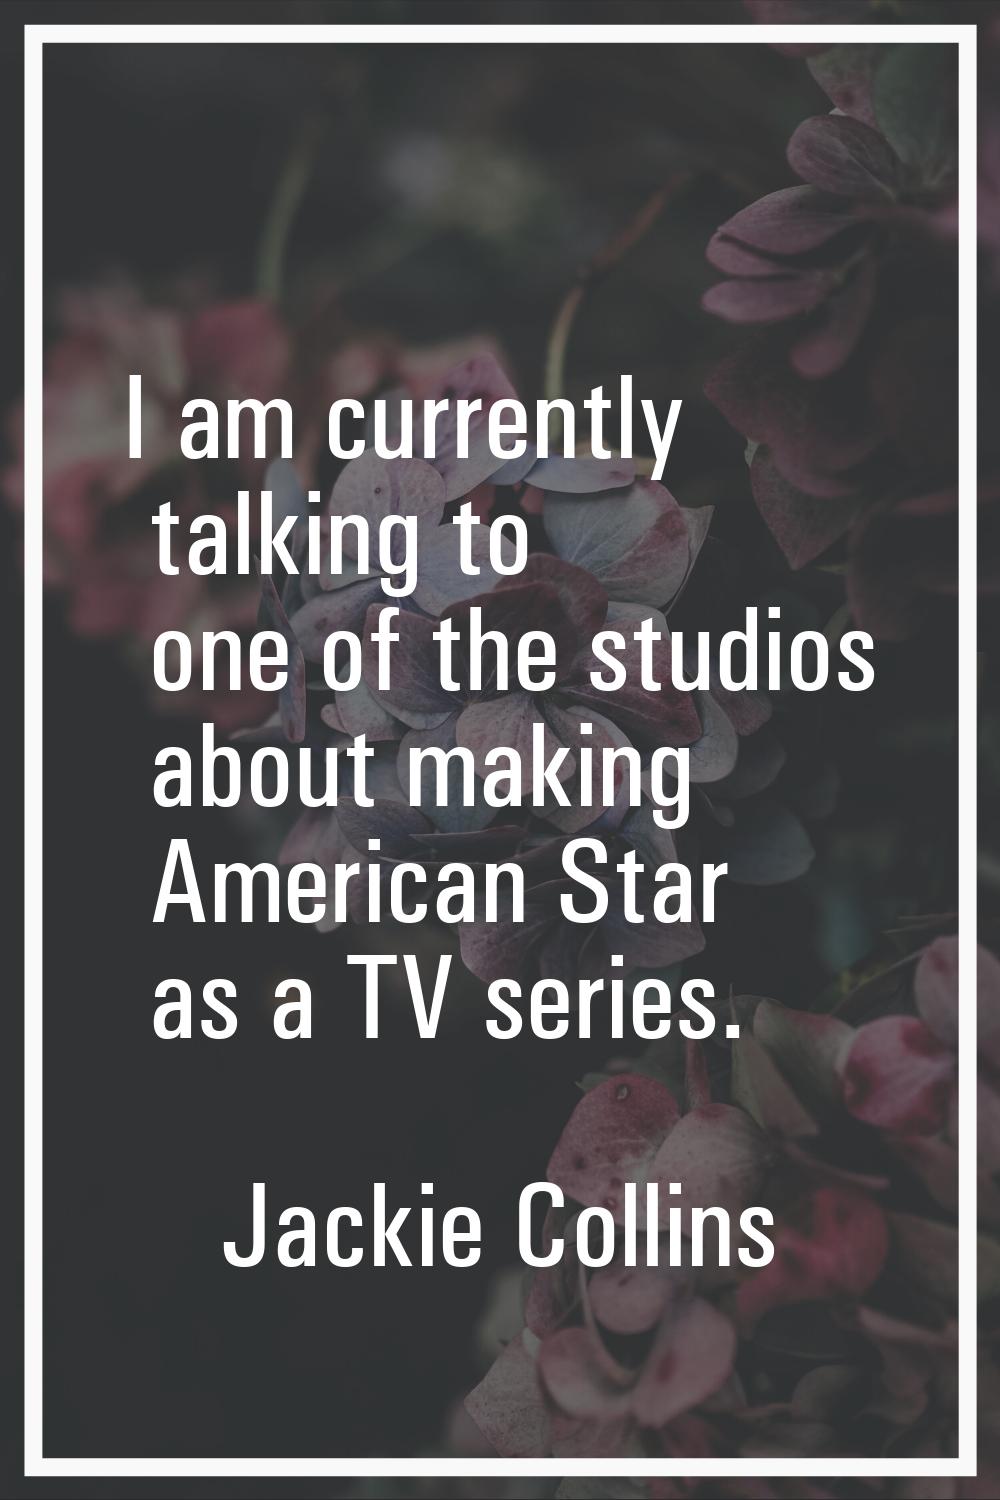 I am currently talking to one of the studios about making American Star as a TV series.